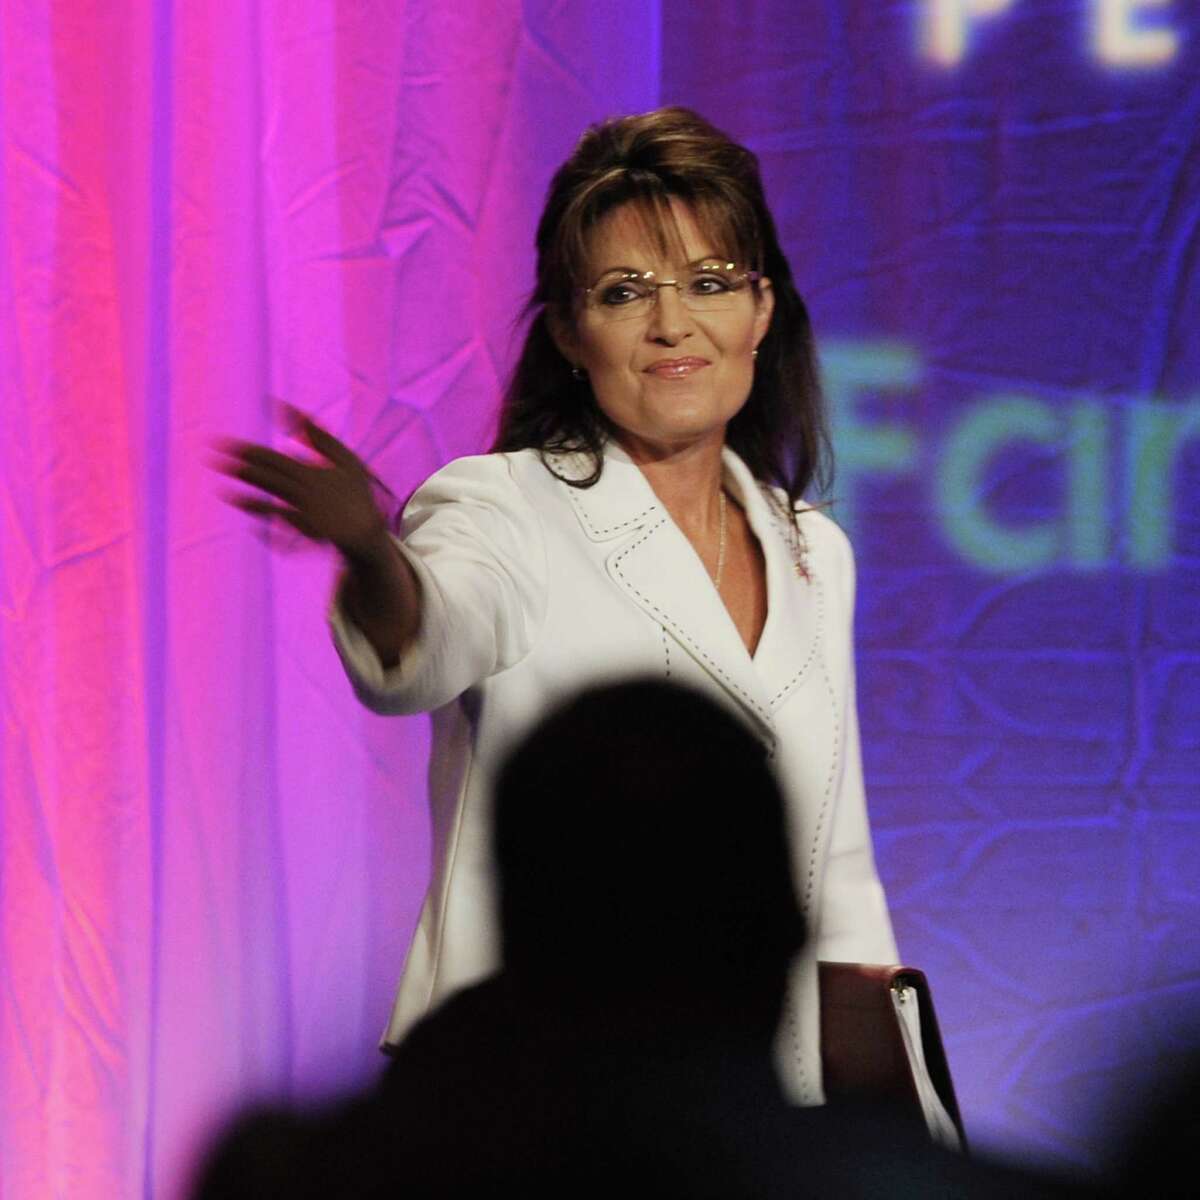 Former vice presidential candidate Sarah Palin acknowledges members of the Pennsylvania Family Institute as she walks on stage to give a speech Friday, Aug. 27, 2010 in Hershey, Pa. (AP Photo/Bradley C Bower)